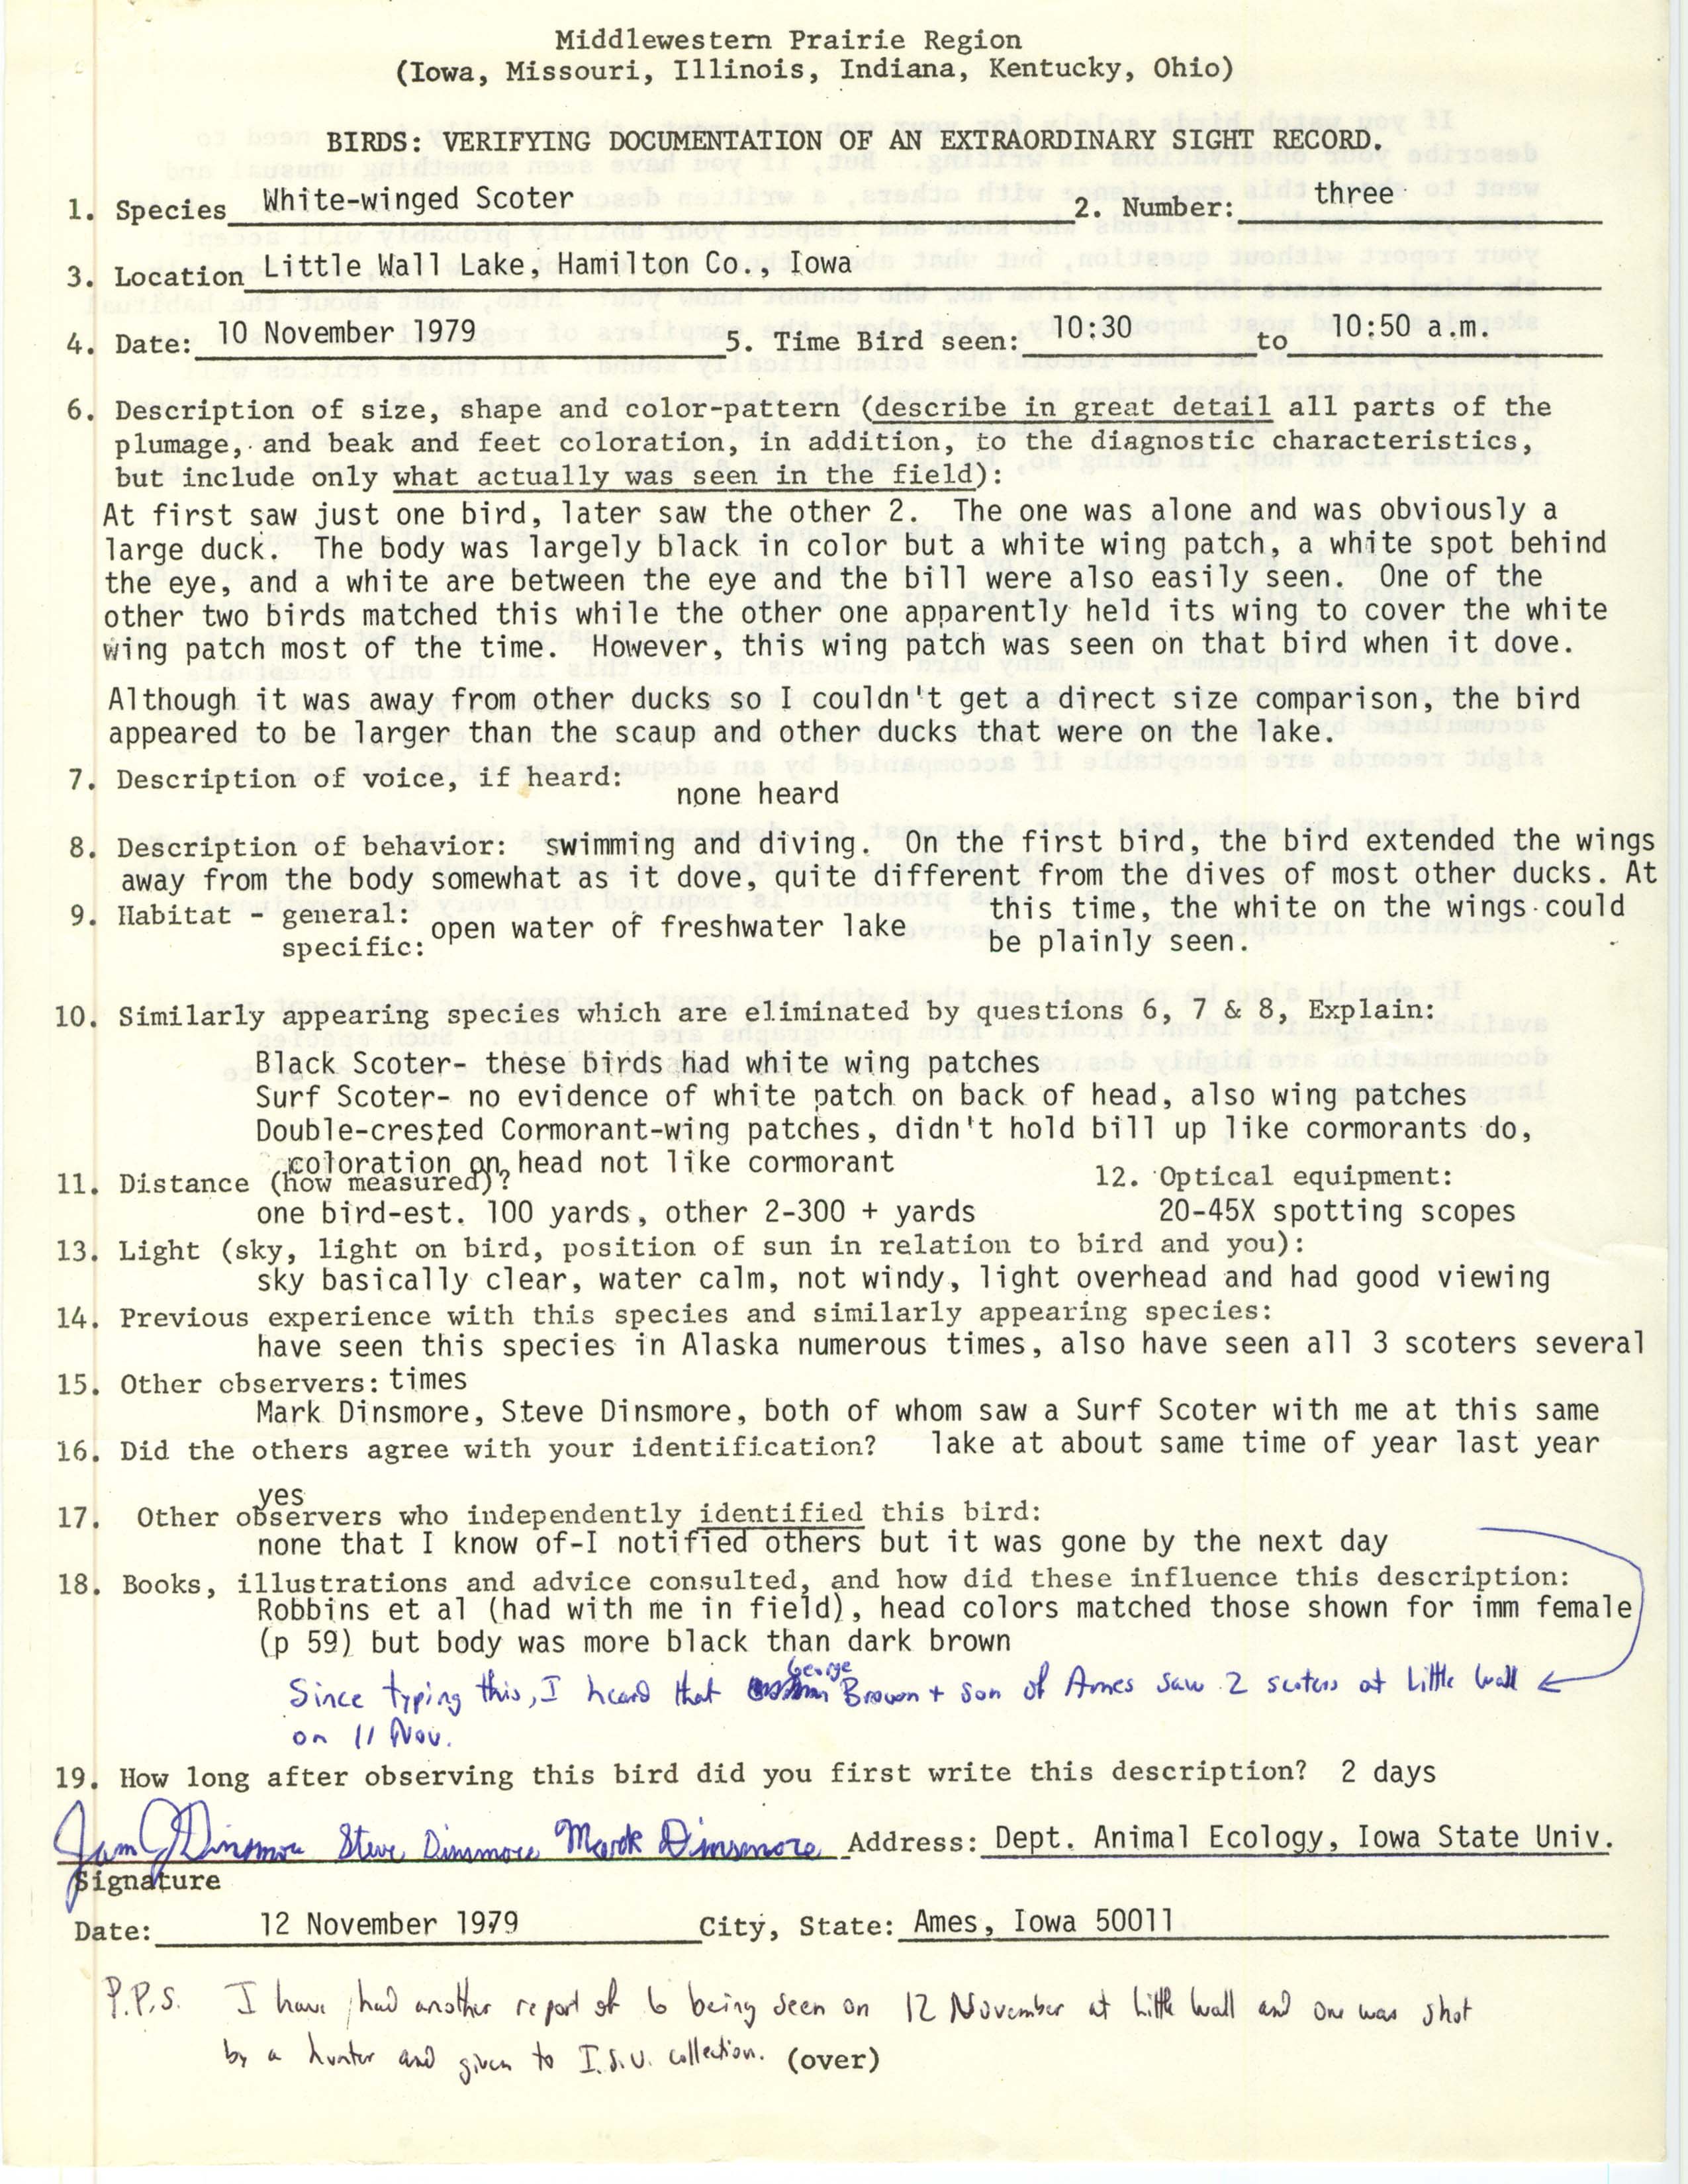 Rare bird documentation form for White-winged Scoter at Little Wall Lake, 1979